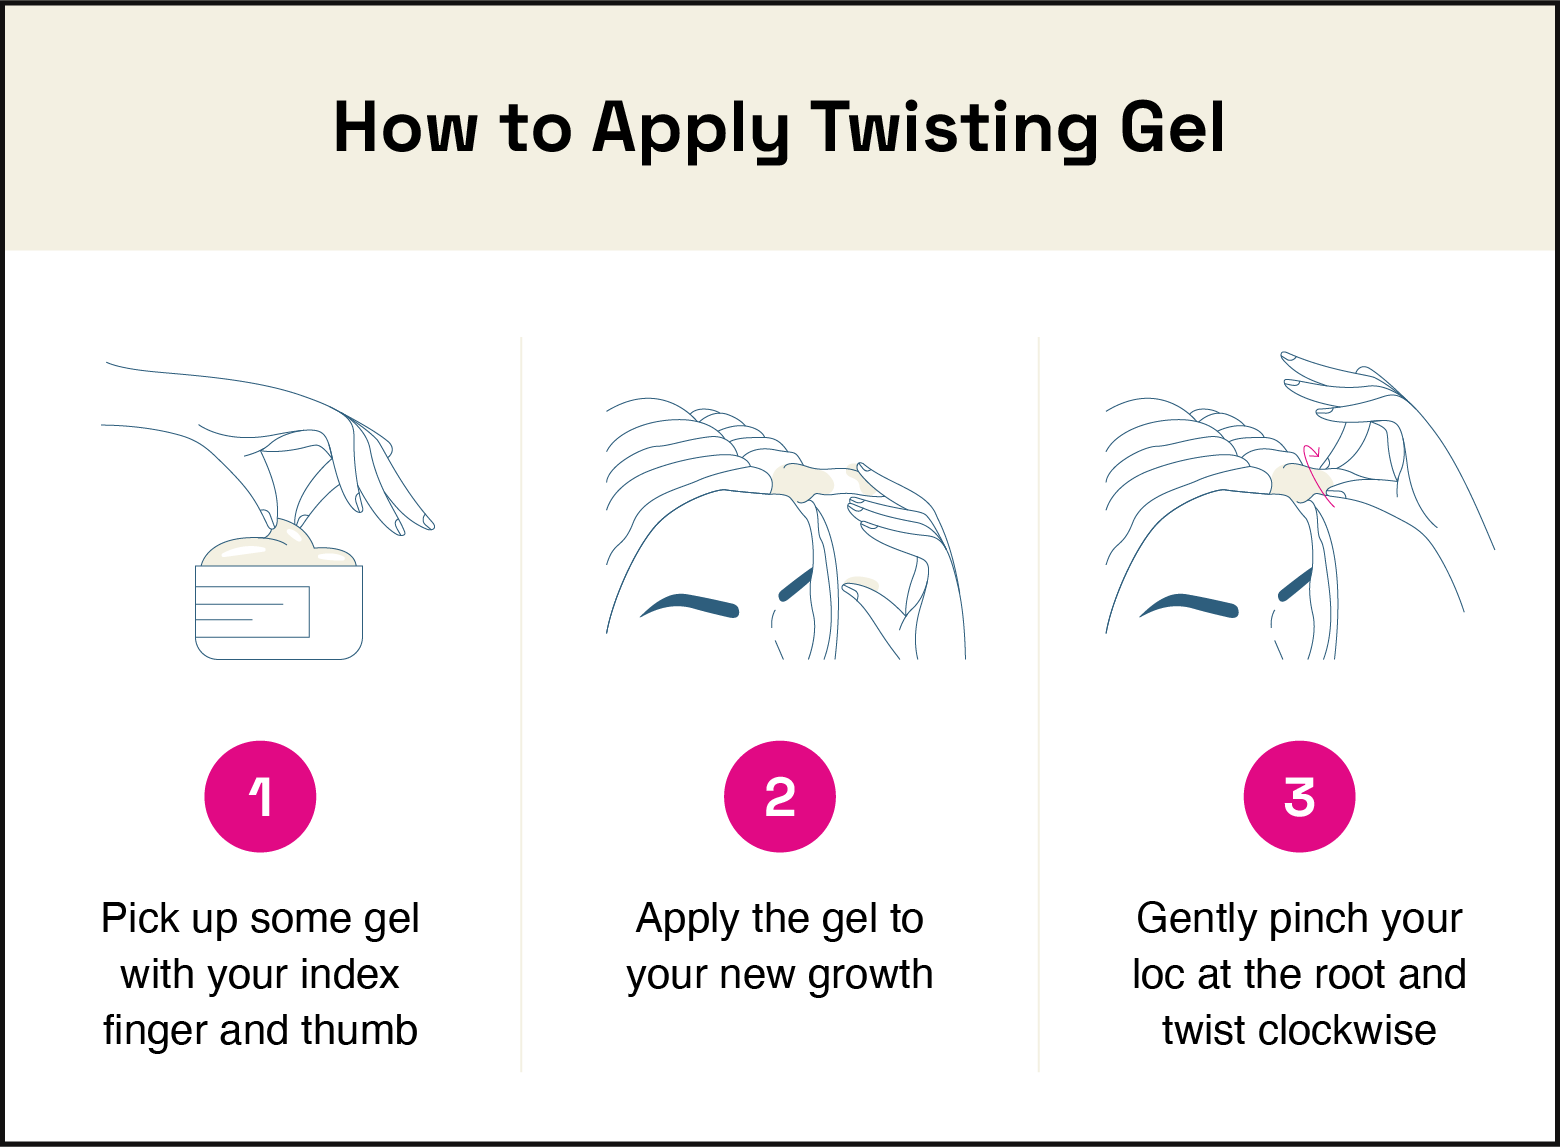 steps to apply twisting gel: pick up gel with index finger and thumb, apply to new growth, gently pich loc at the root and twist clockwise